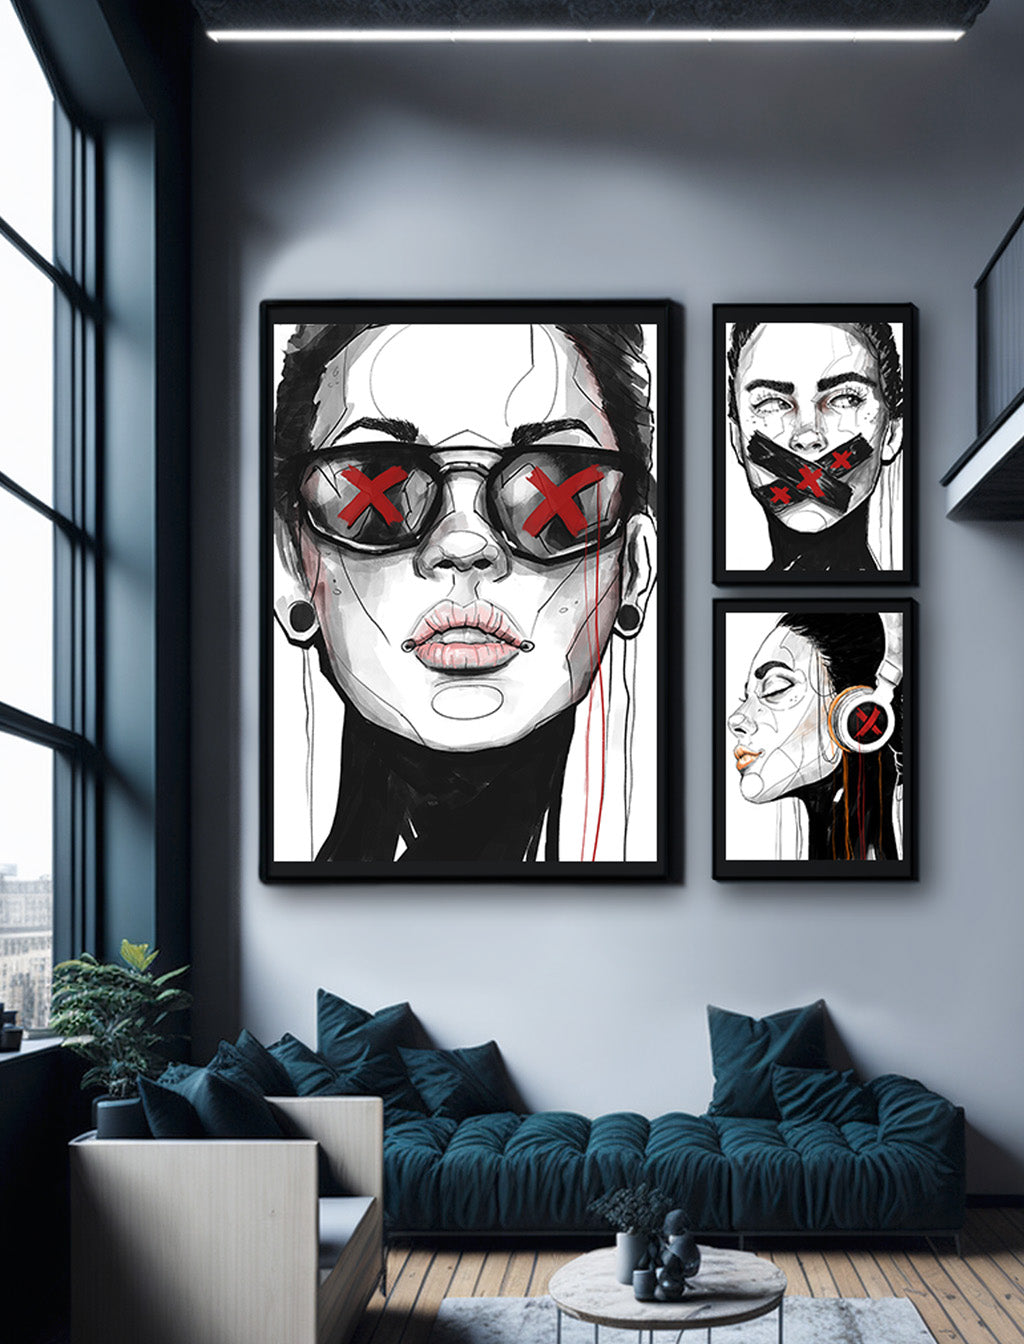 BUNDLE of limited art prints 'Don't speak', 'Won't see' and 'Can't hear' - 3 Monkeys collection